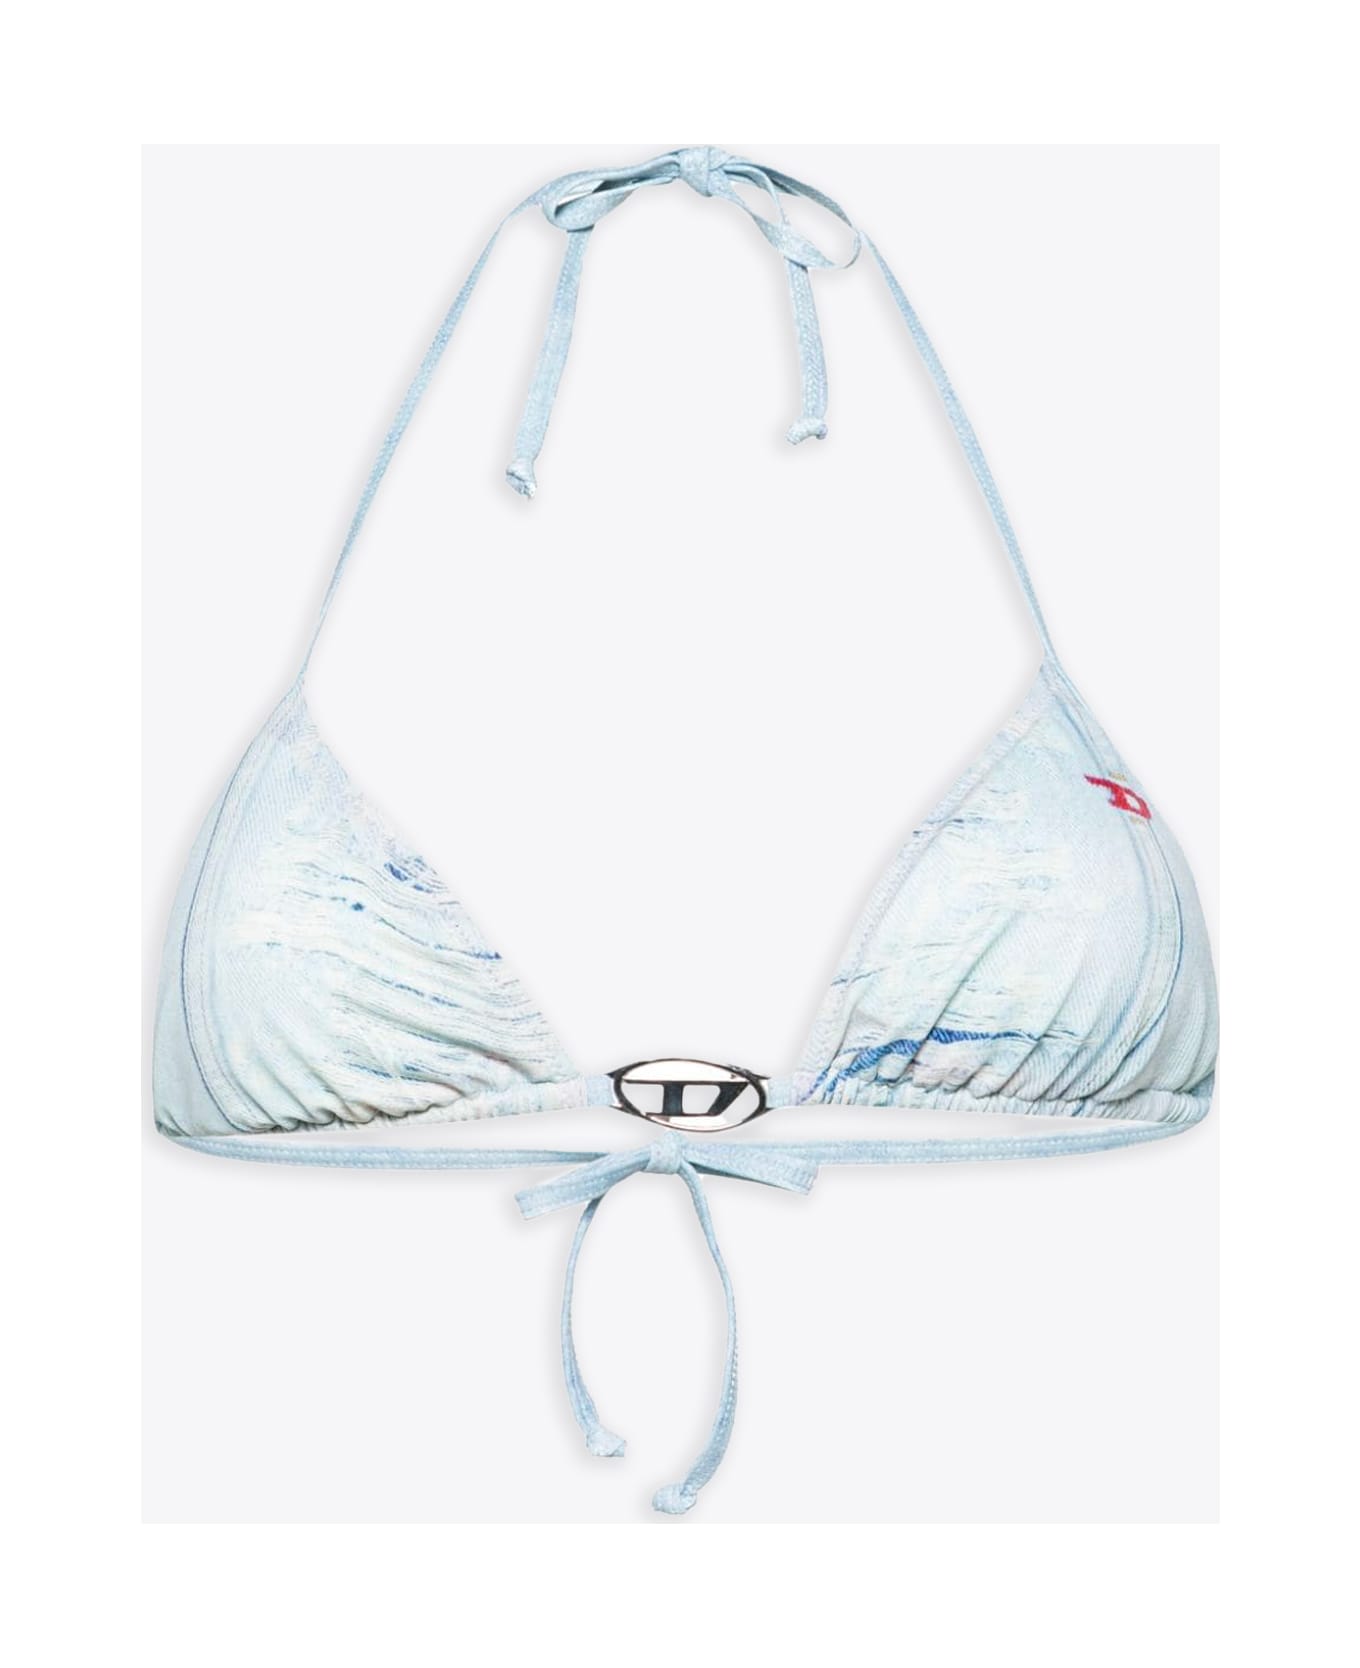 Diesel Bfb-sees-t Bikini Top In Denim Printed Lycra With Metal Oval D - Bfb Sees T - LIGHT BLUE